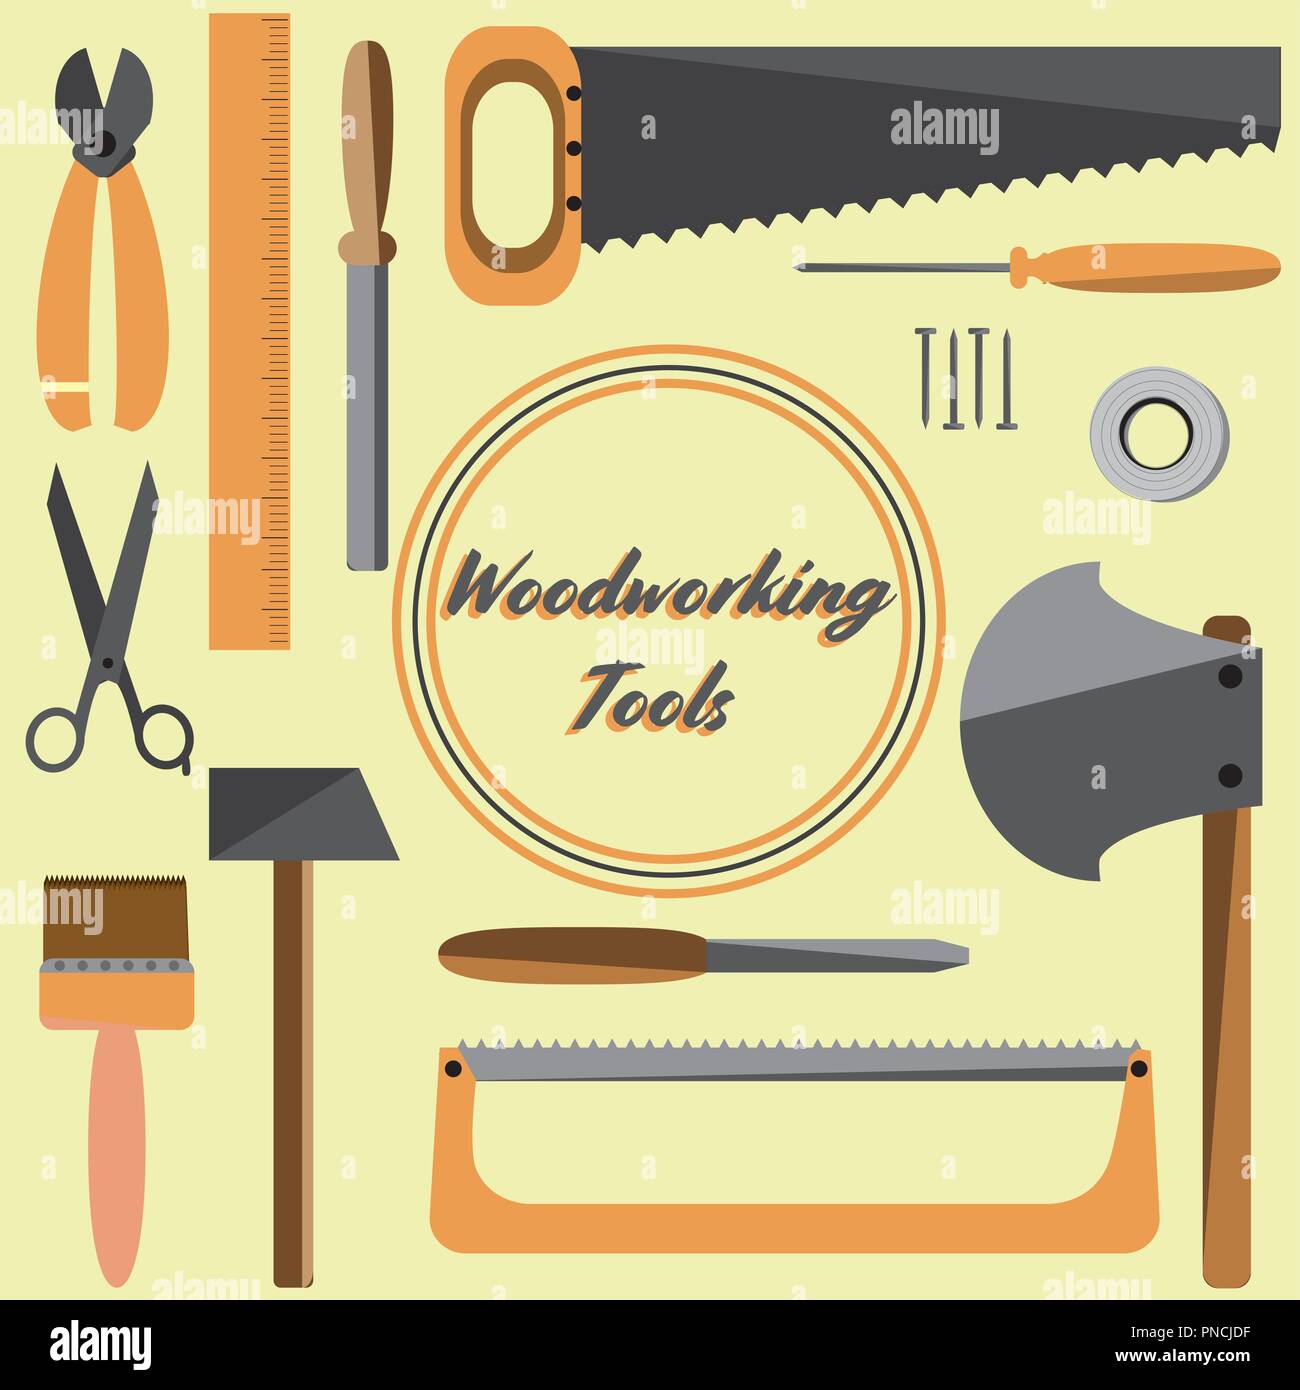 Set of woodworking tools icons Stock Vector